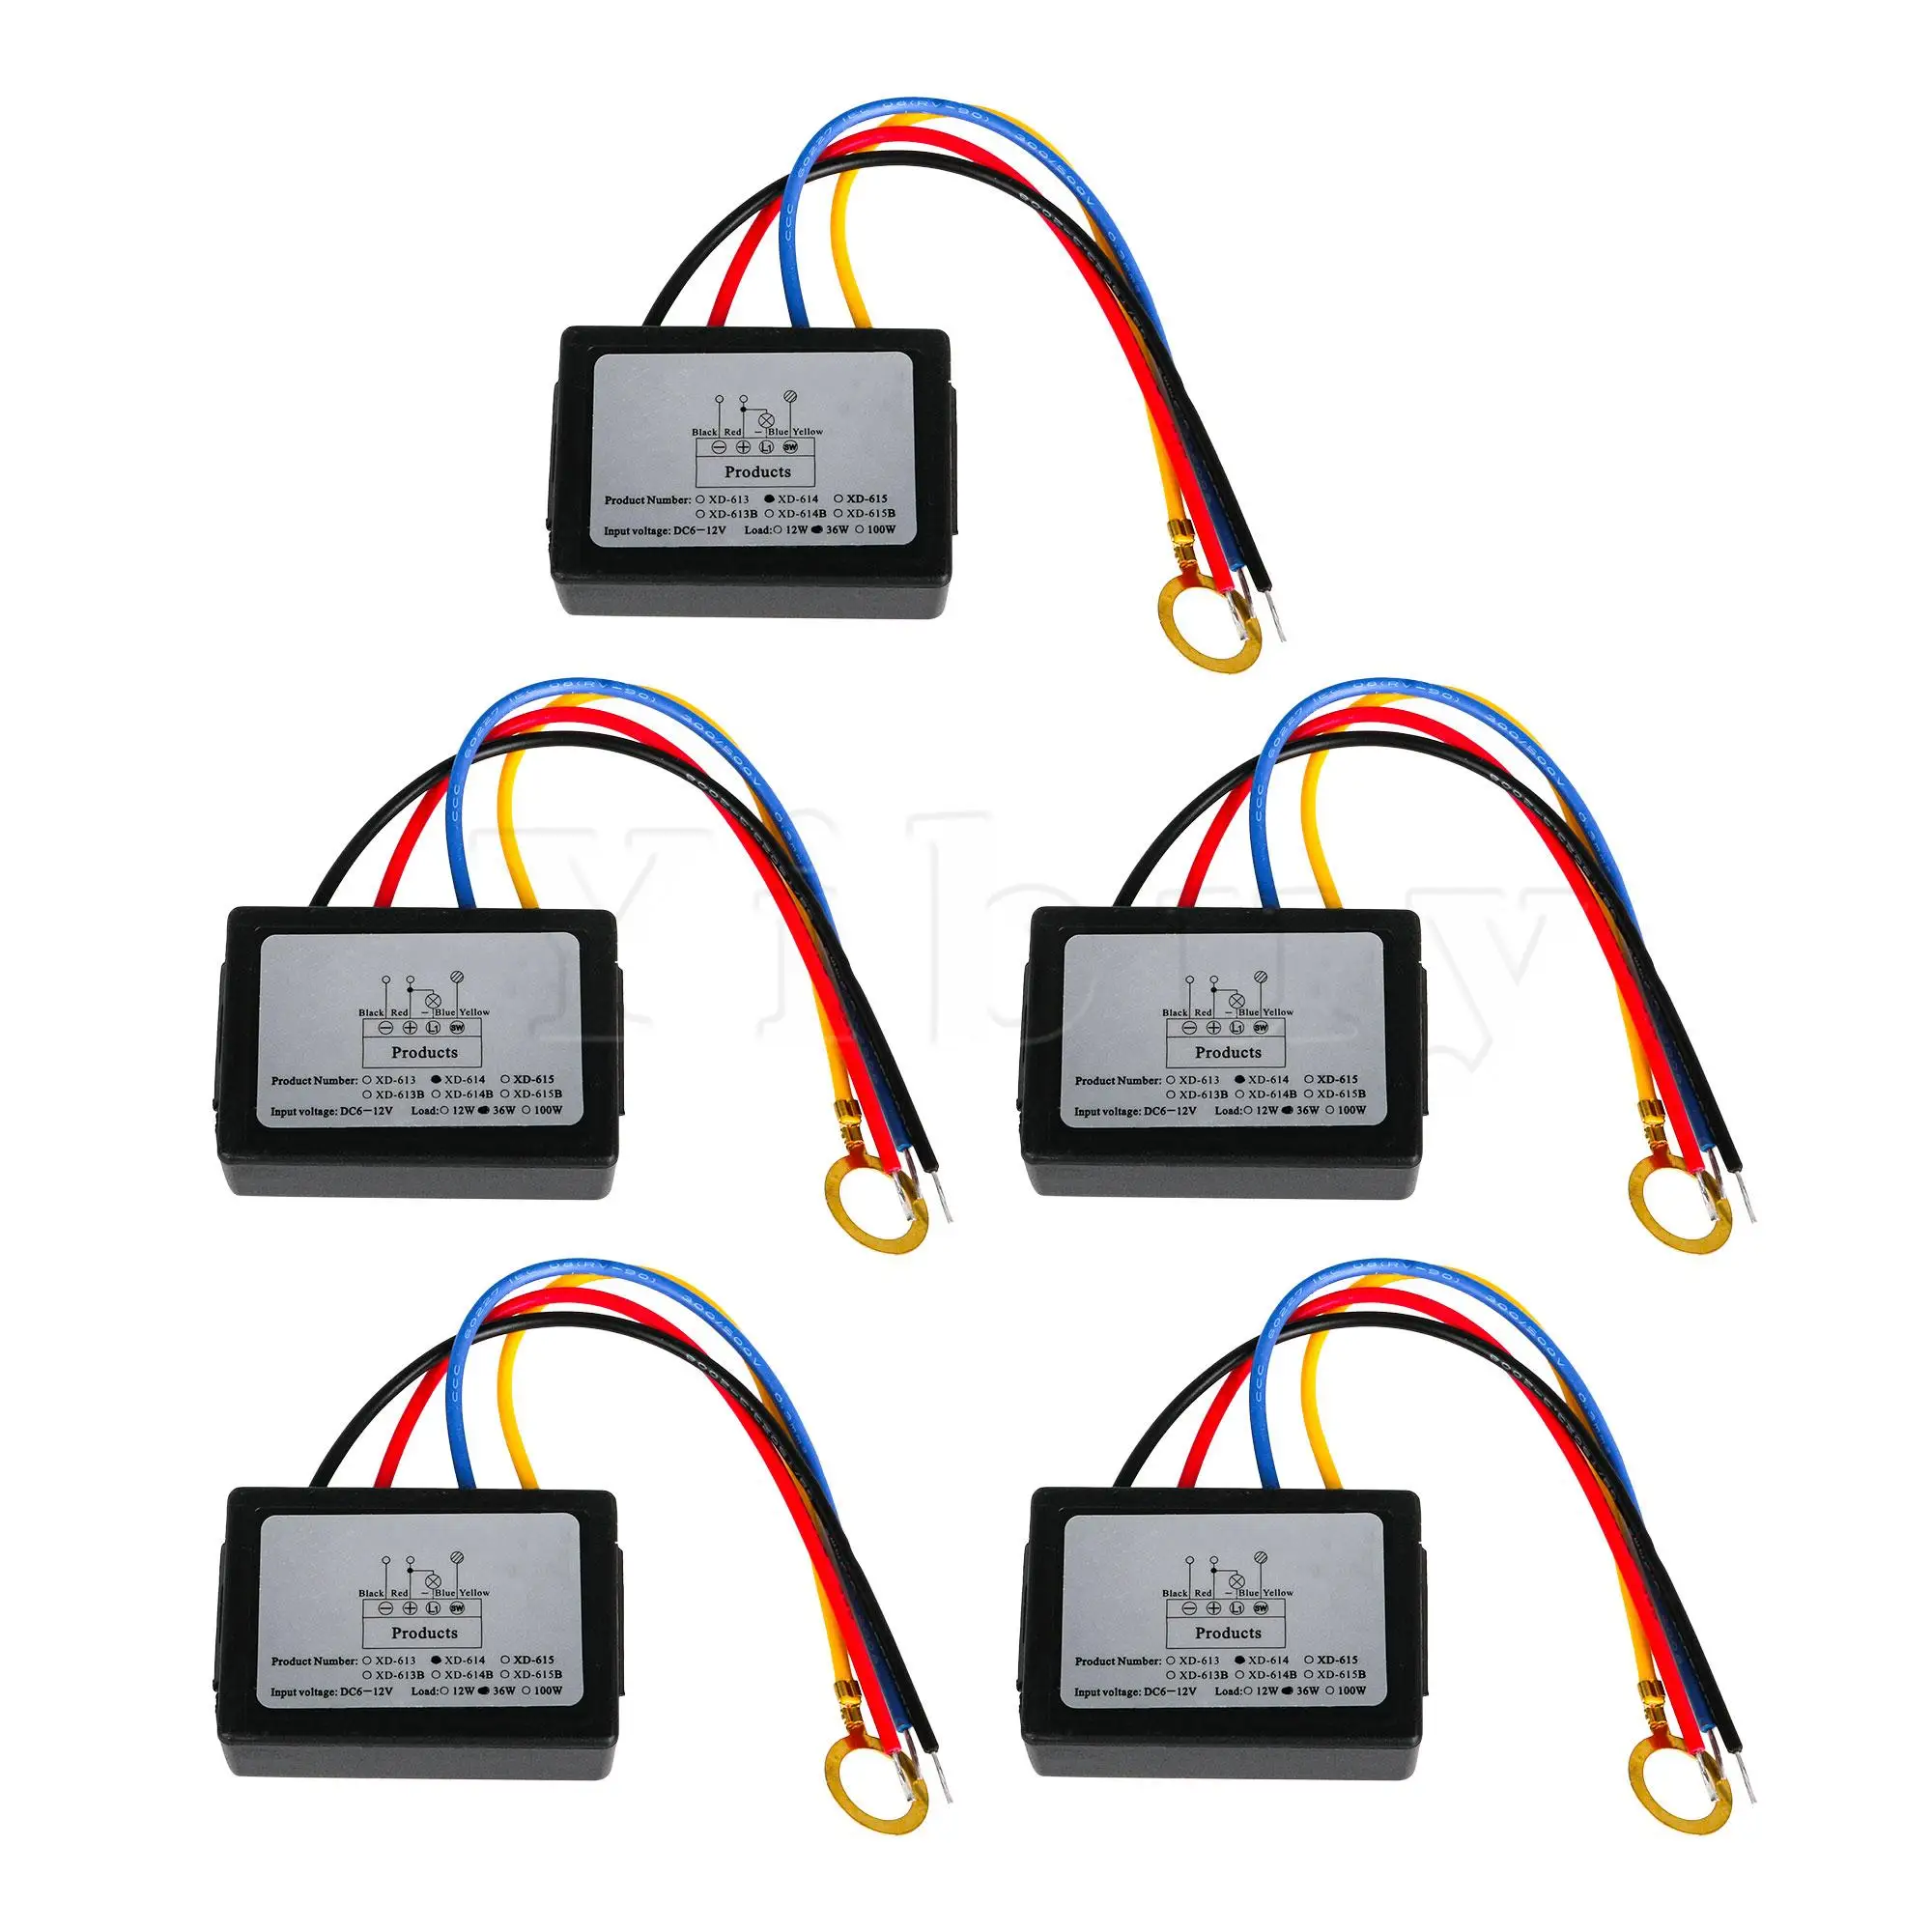 

5x Light Sensor Module XD-614 with Dimming Function 3 Way DC 6-12V 36W